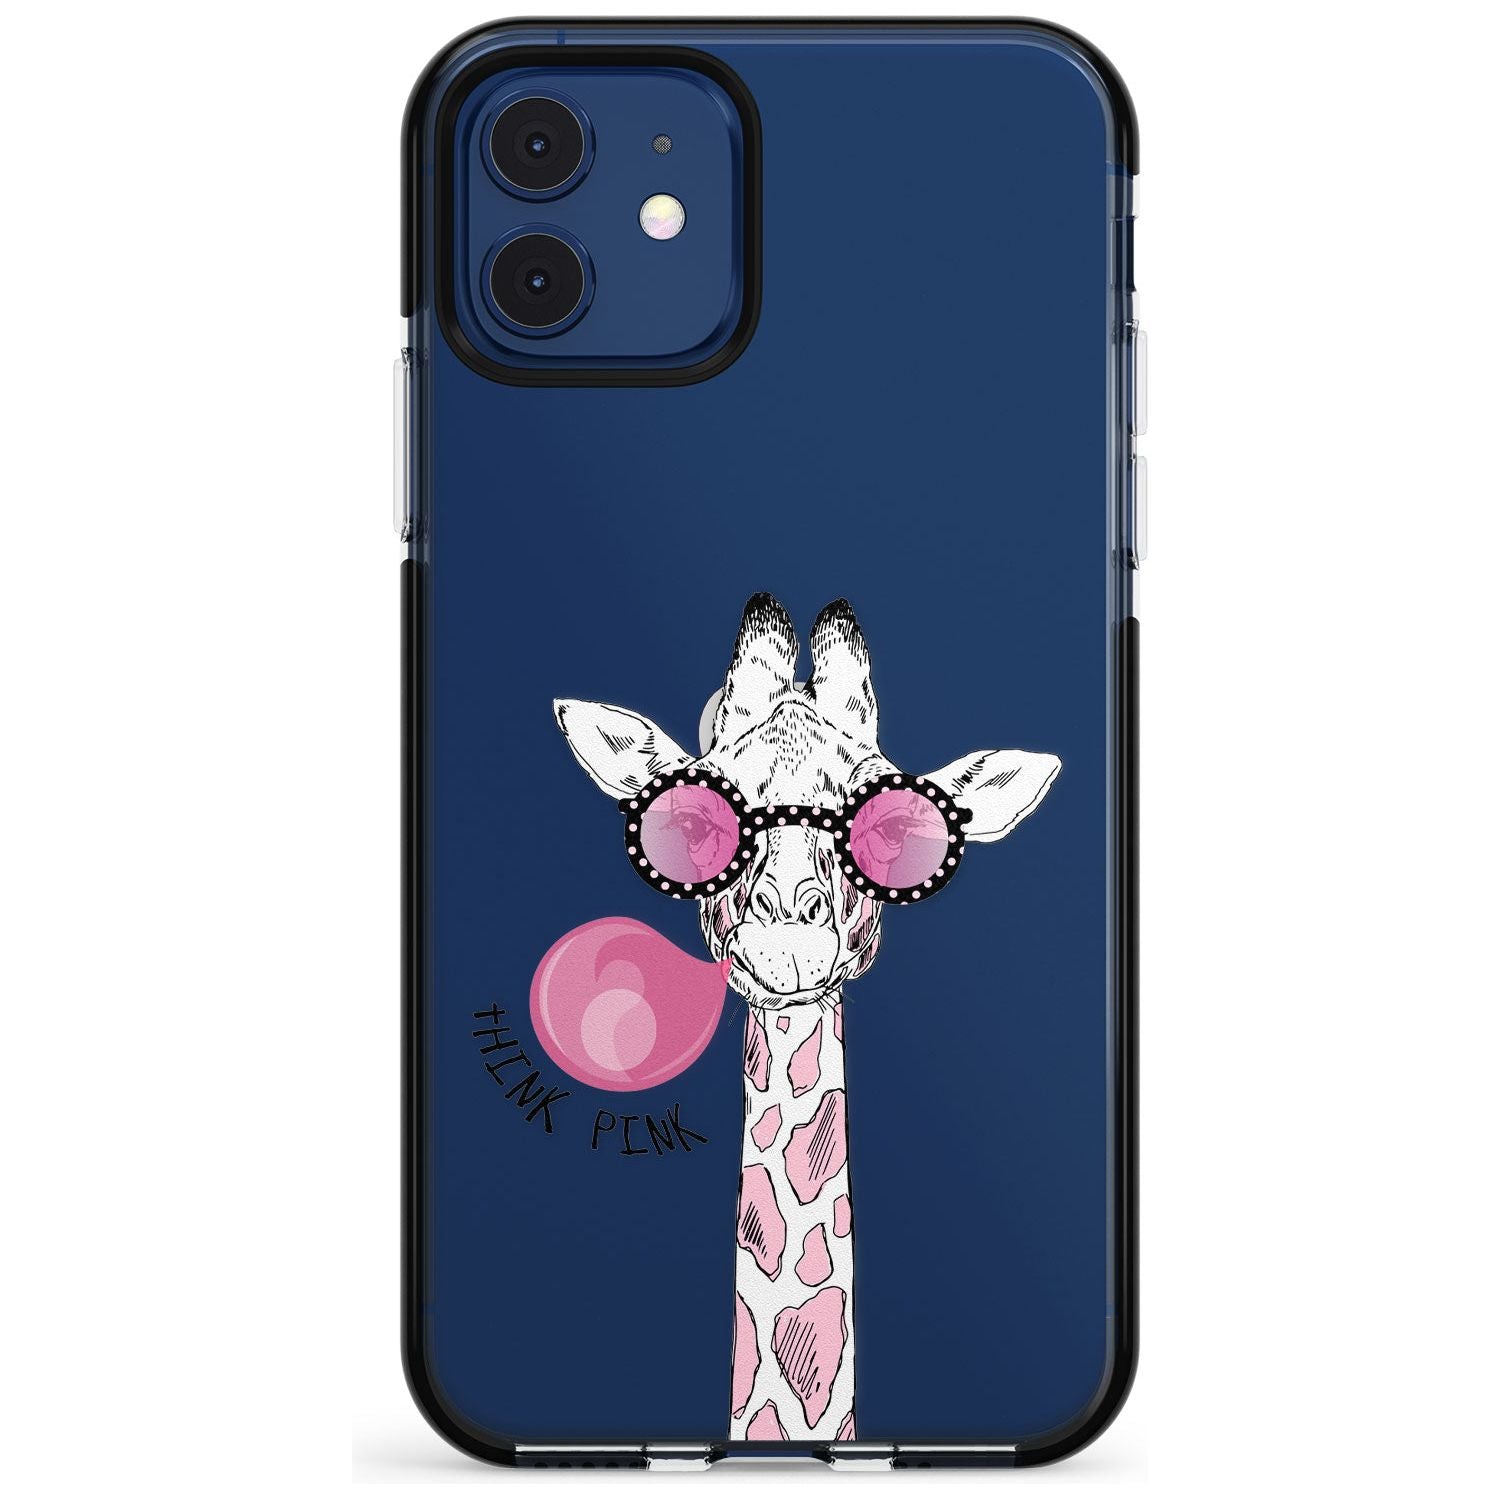 Think Pink Giraffe Black Impact Phone Case for iPhone 11 Pro Max